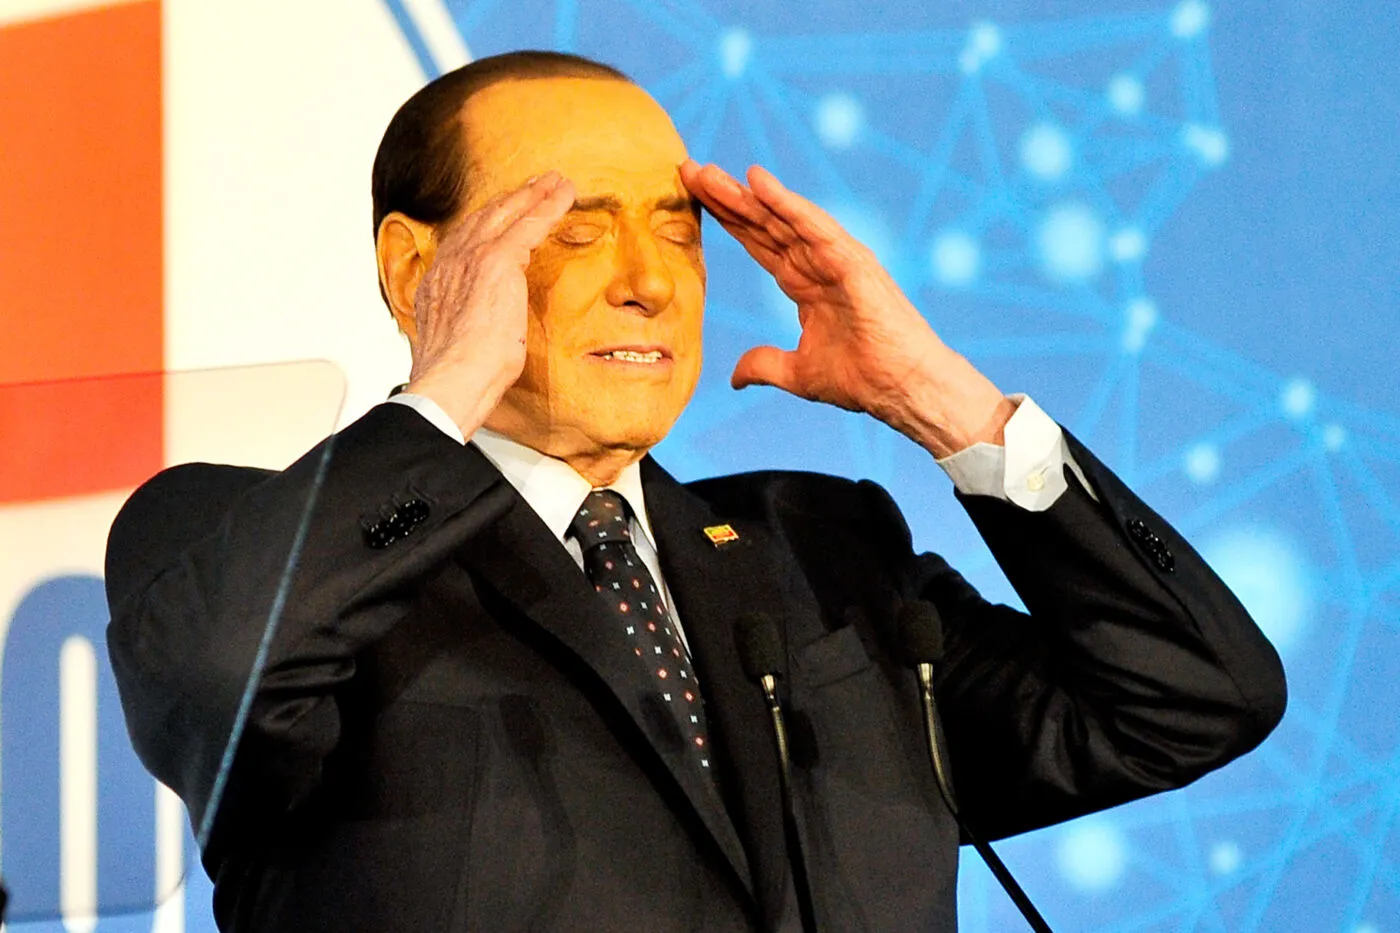 Silvio Berlusconi Former President of the Council of Ministers of the Italian Republic, during the Forza Italia party event "Italy of the Future, the uniting force" which was held at the Palacongressi of the Mostra dOltremare in Naples. Napoli, Italy, 21 May 2022. (photo by Vincenzo Izzo/Sipa USA) - Photo by Icon sport